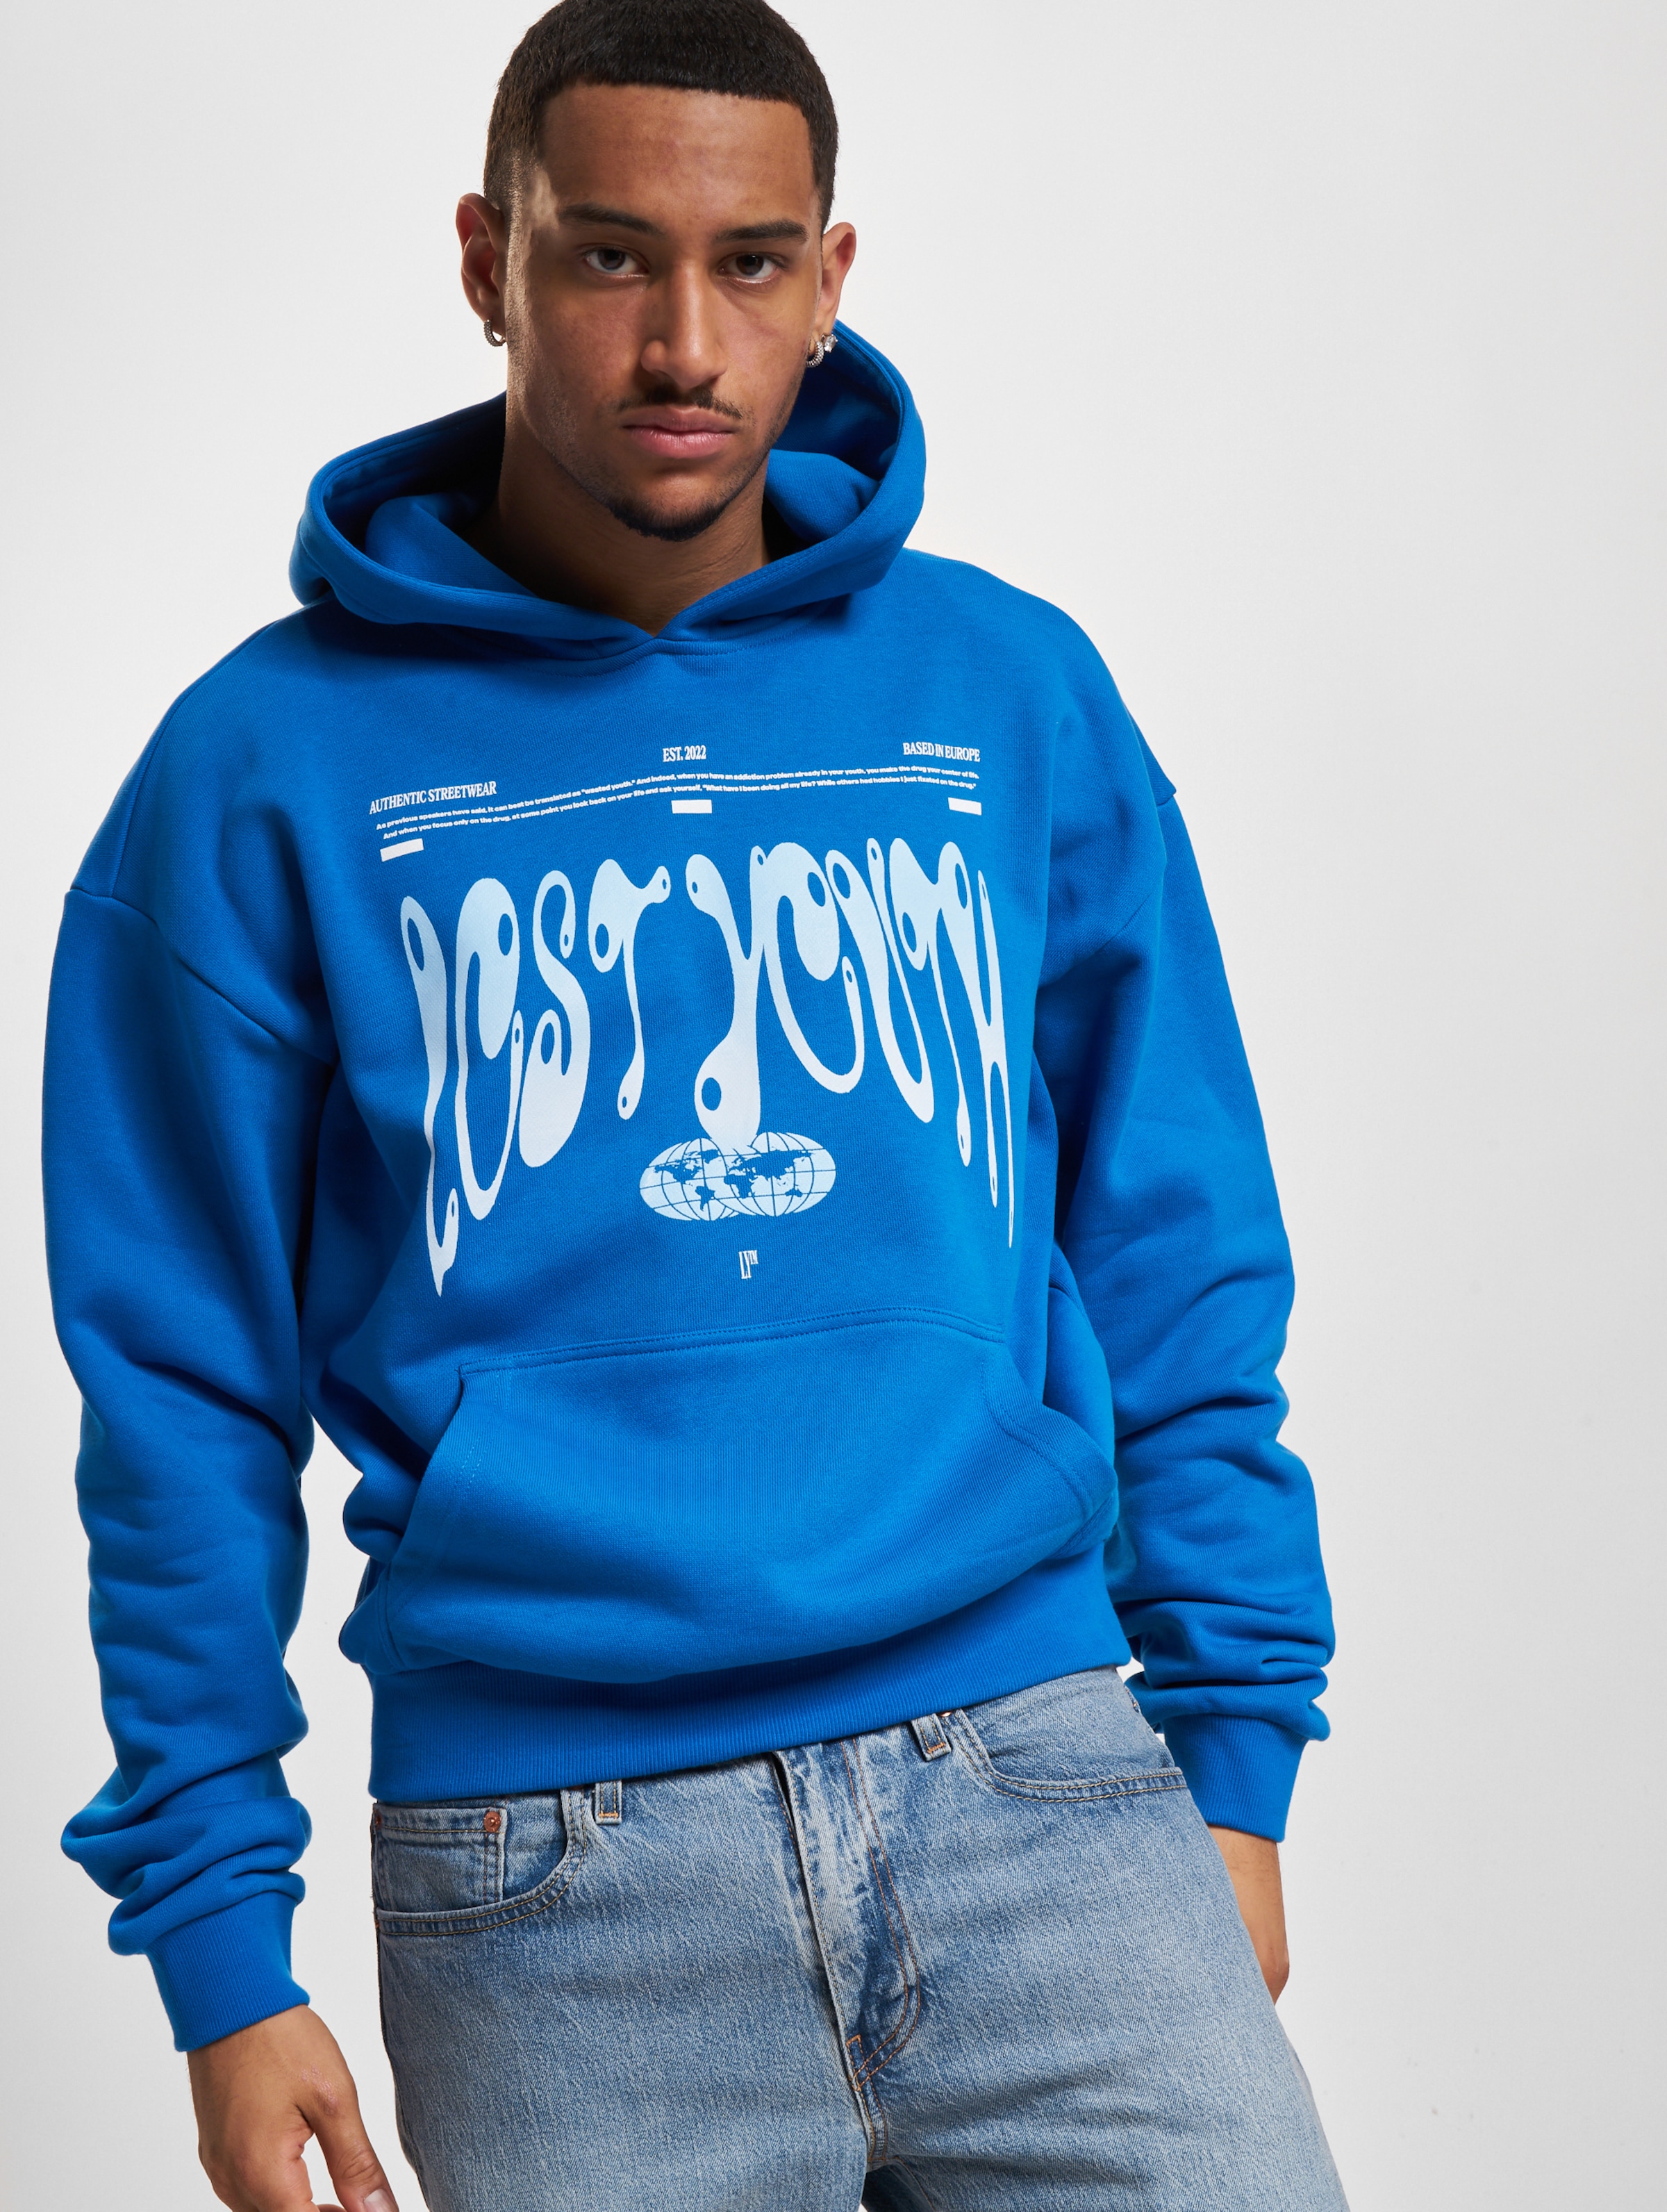 Lost Youth LY HOODY - AUTHENTIC Mannen op kleur blauw, Maat 5XL